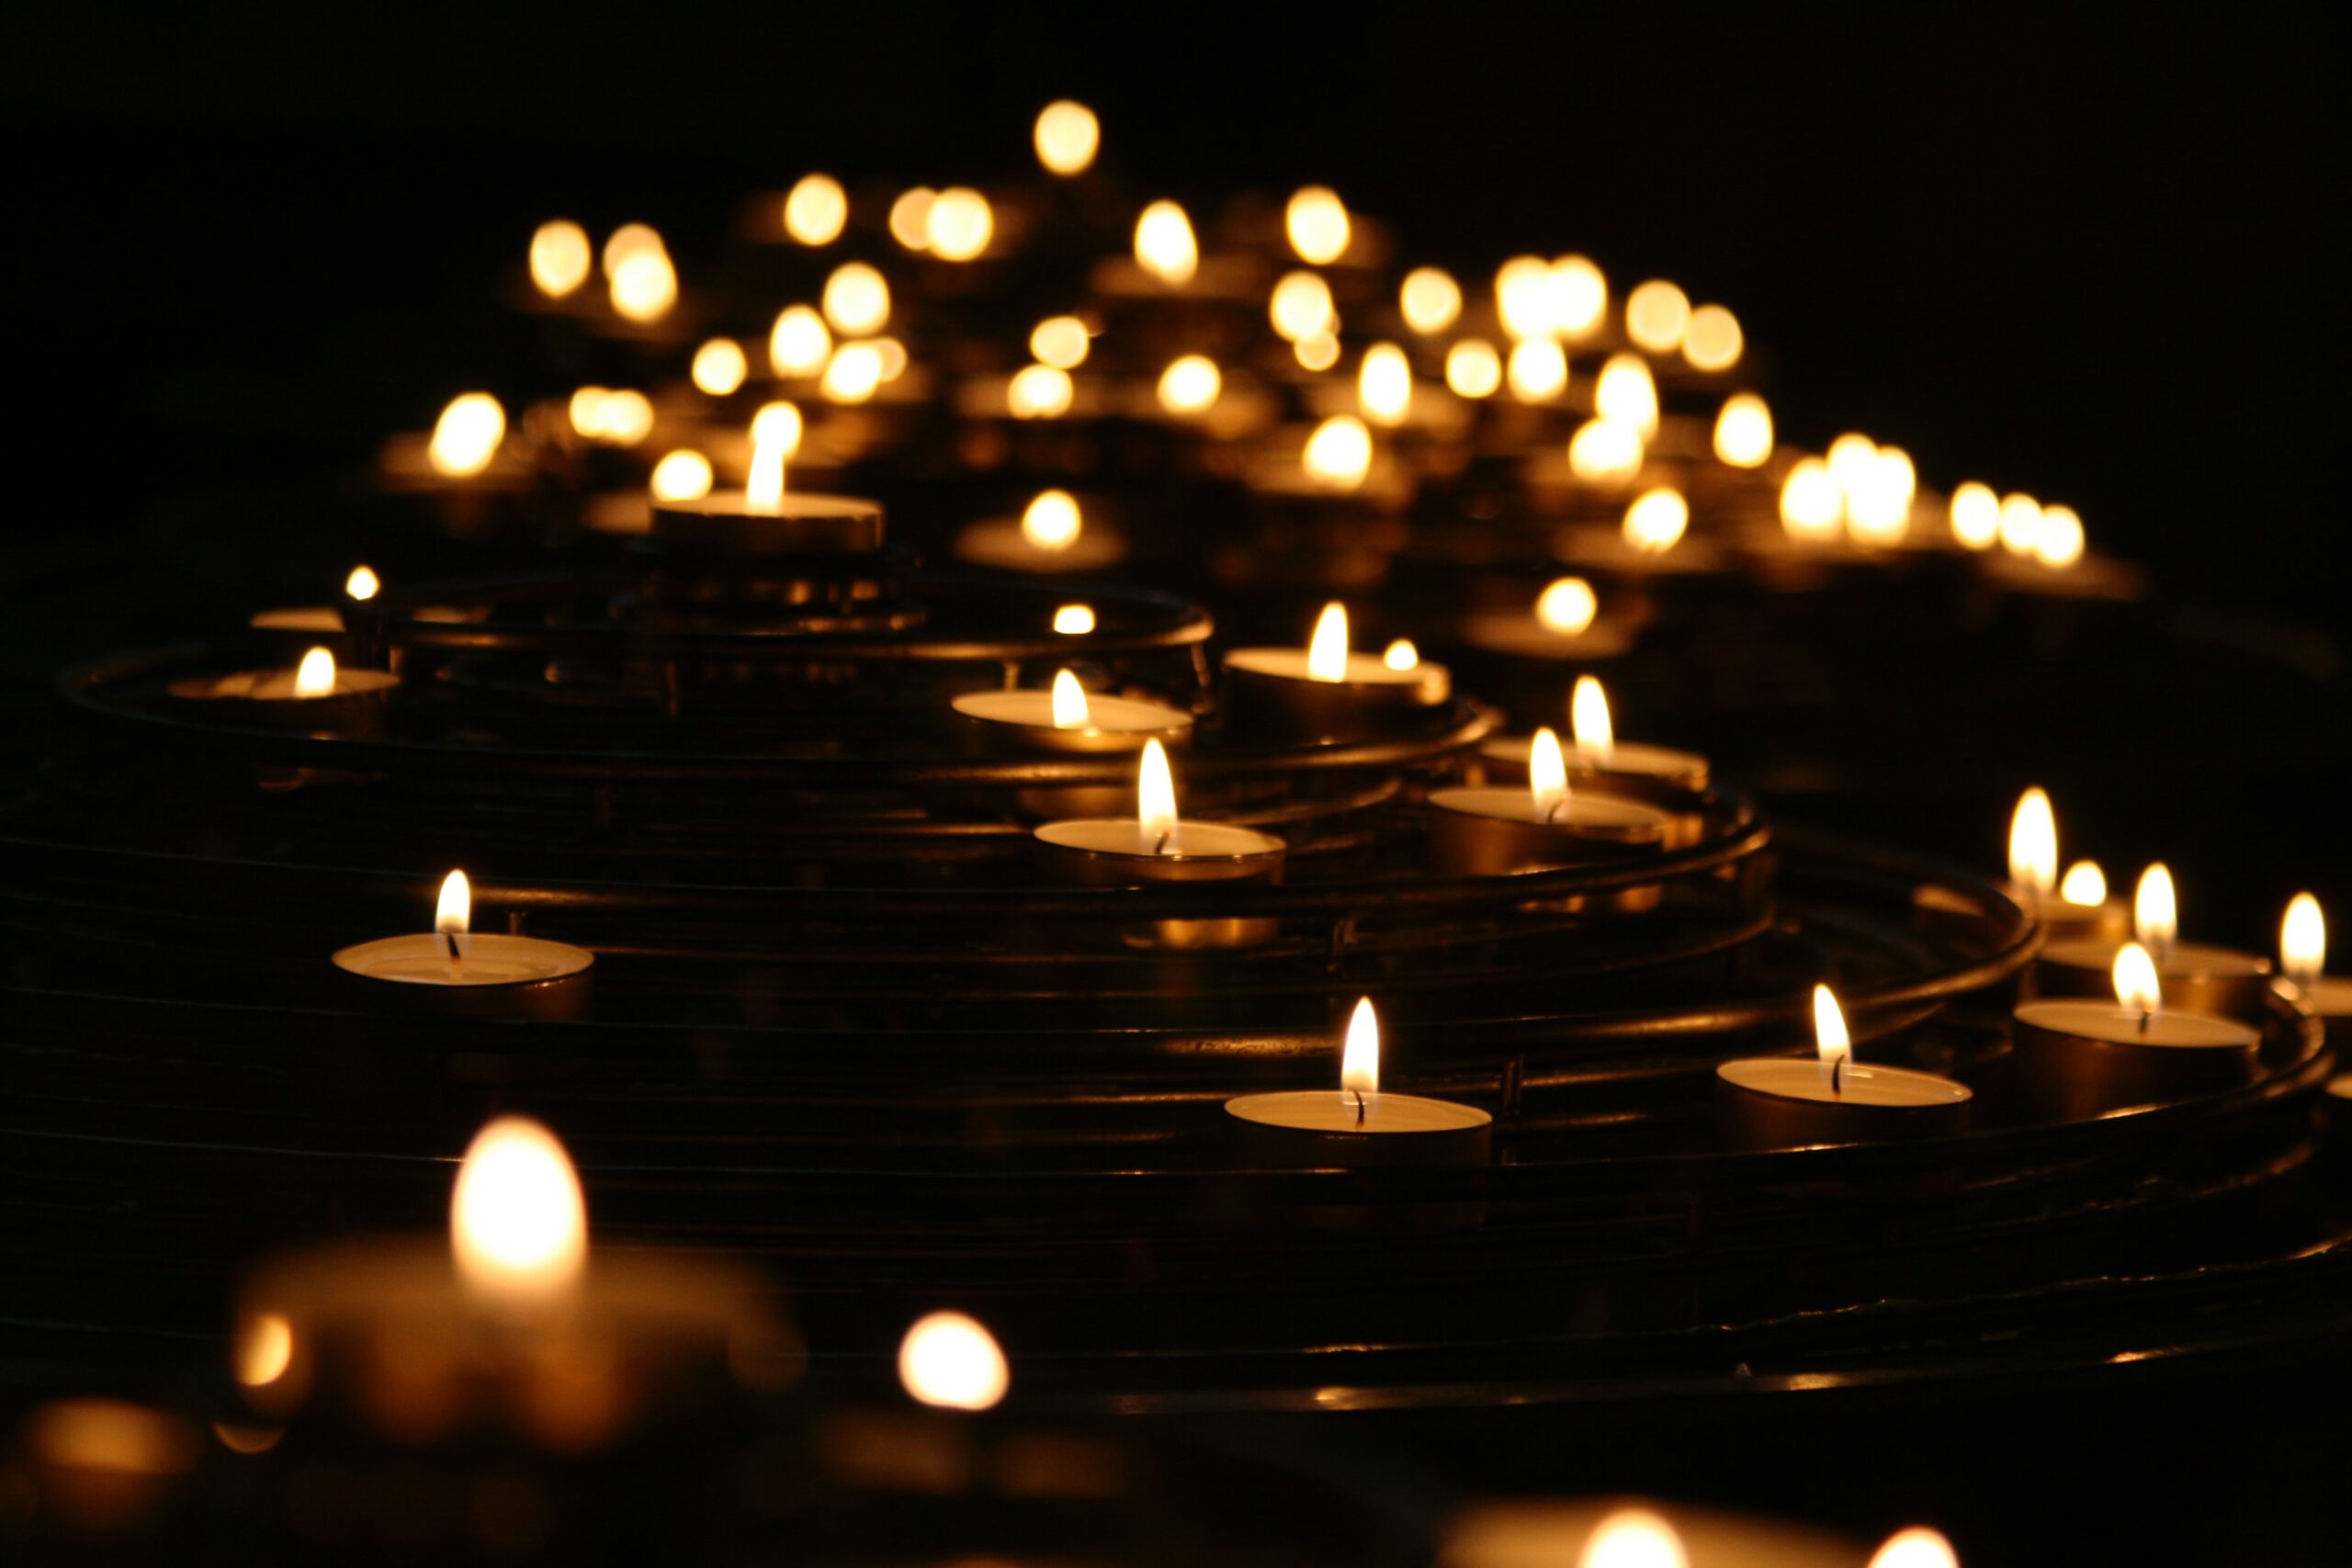 Candles lit floating in night pond